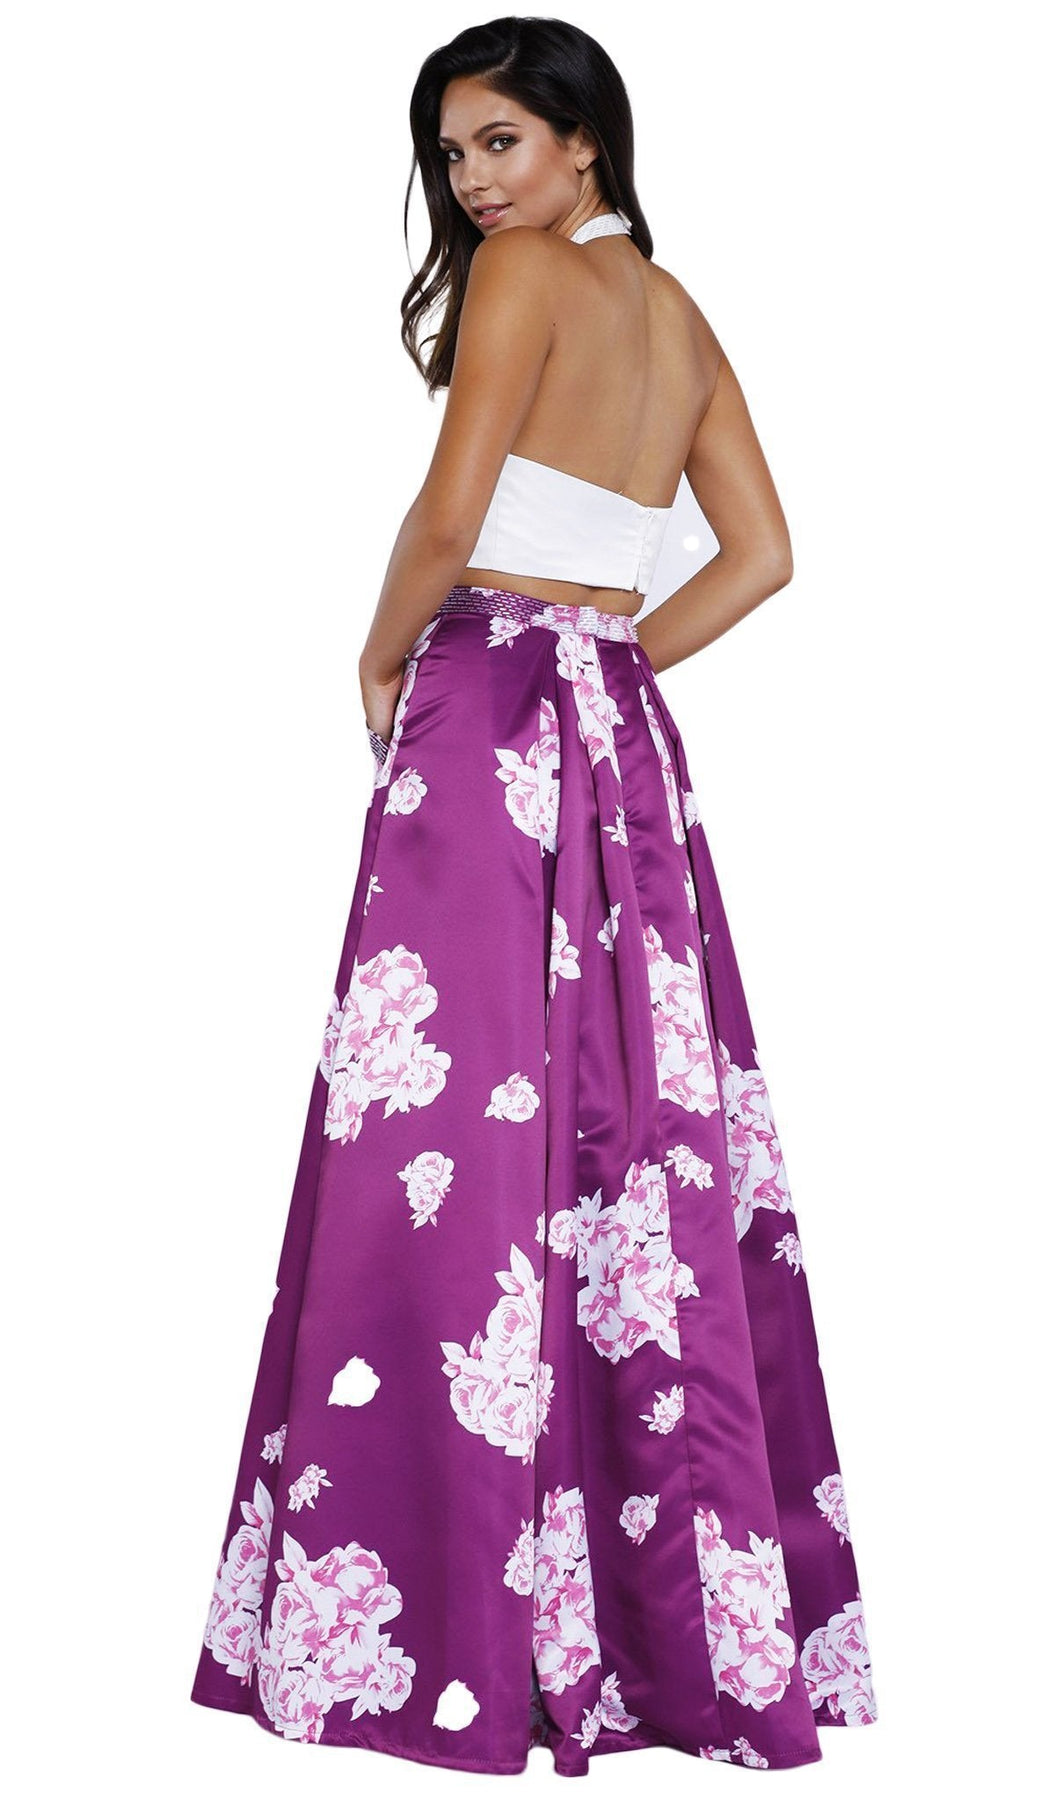 Nox Anabel - 8245 Two-piece Floral Halter A-line Evening Dress Special Occasion Dress